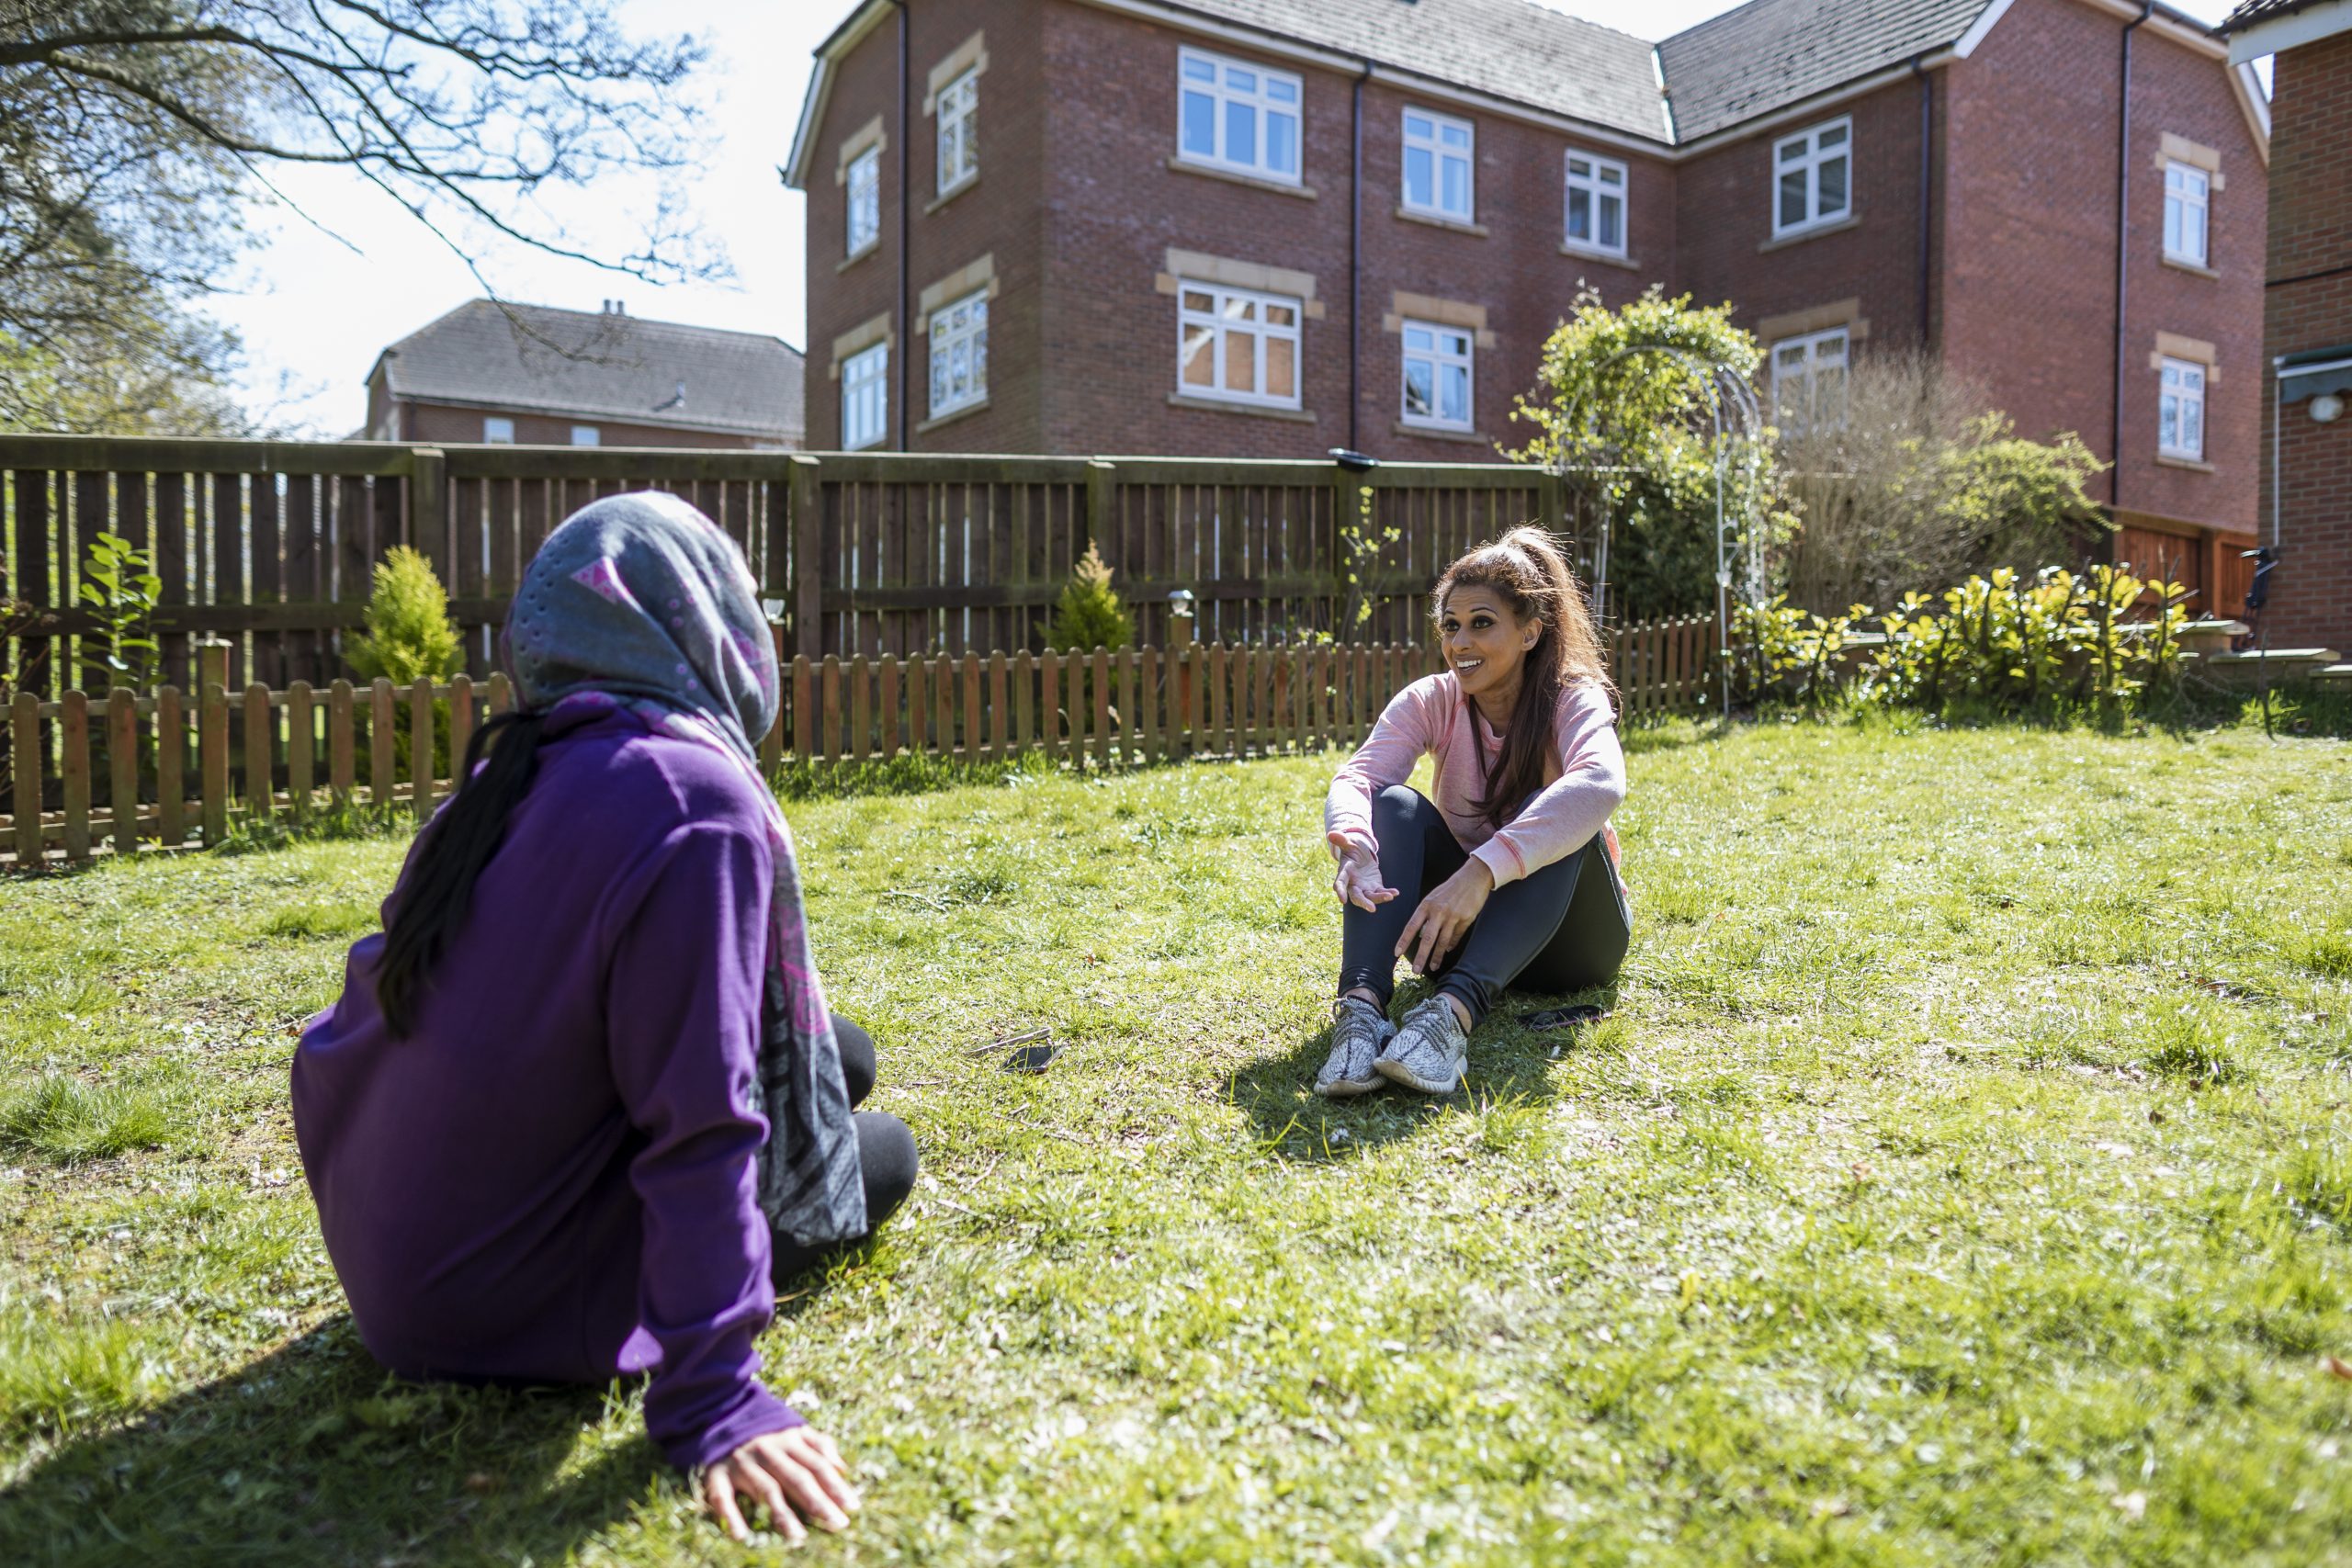 Shazia, a 45-55 year old south asian woman sitting in her garden